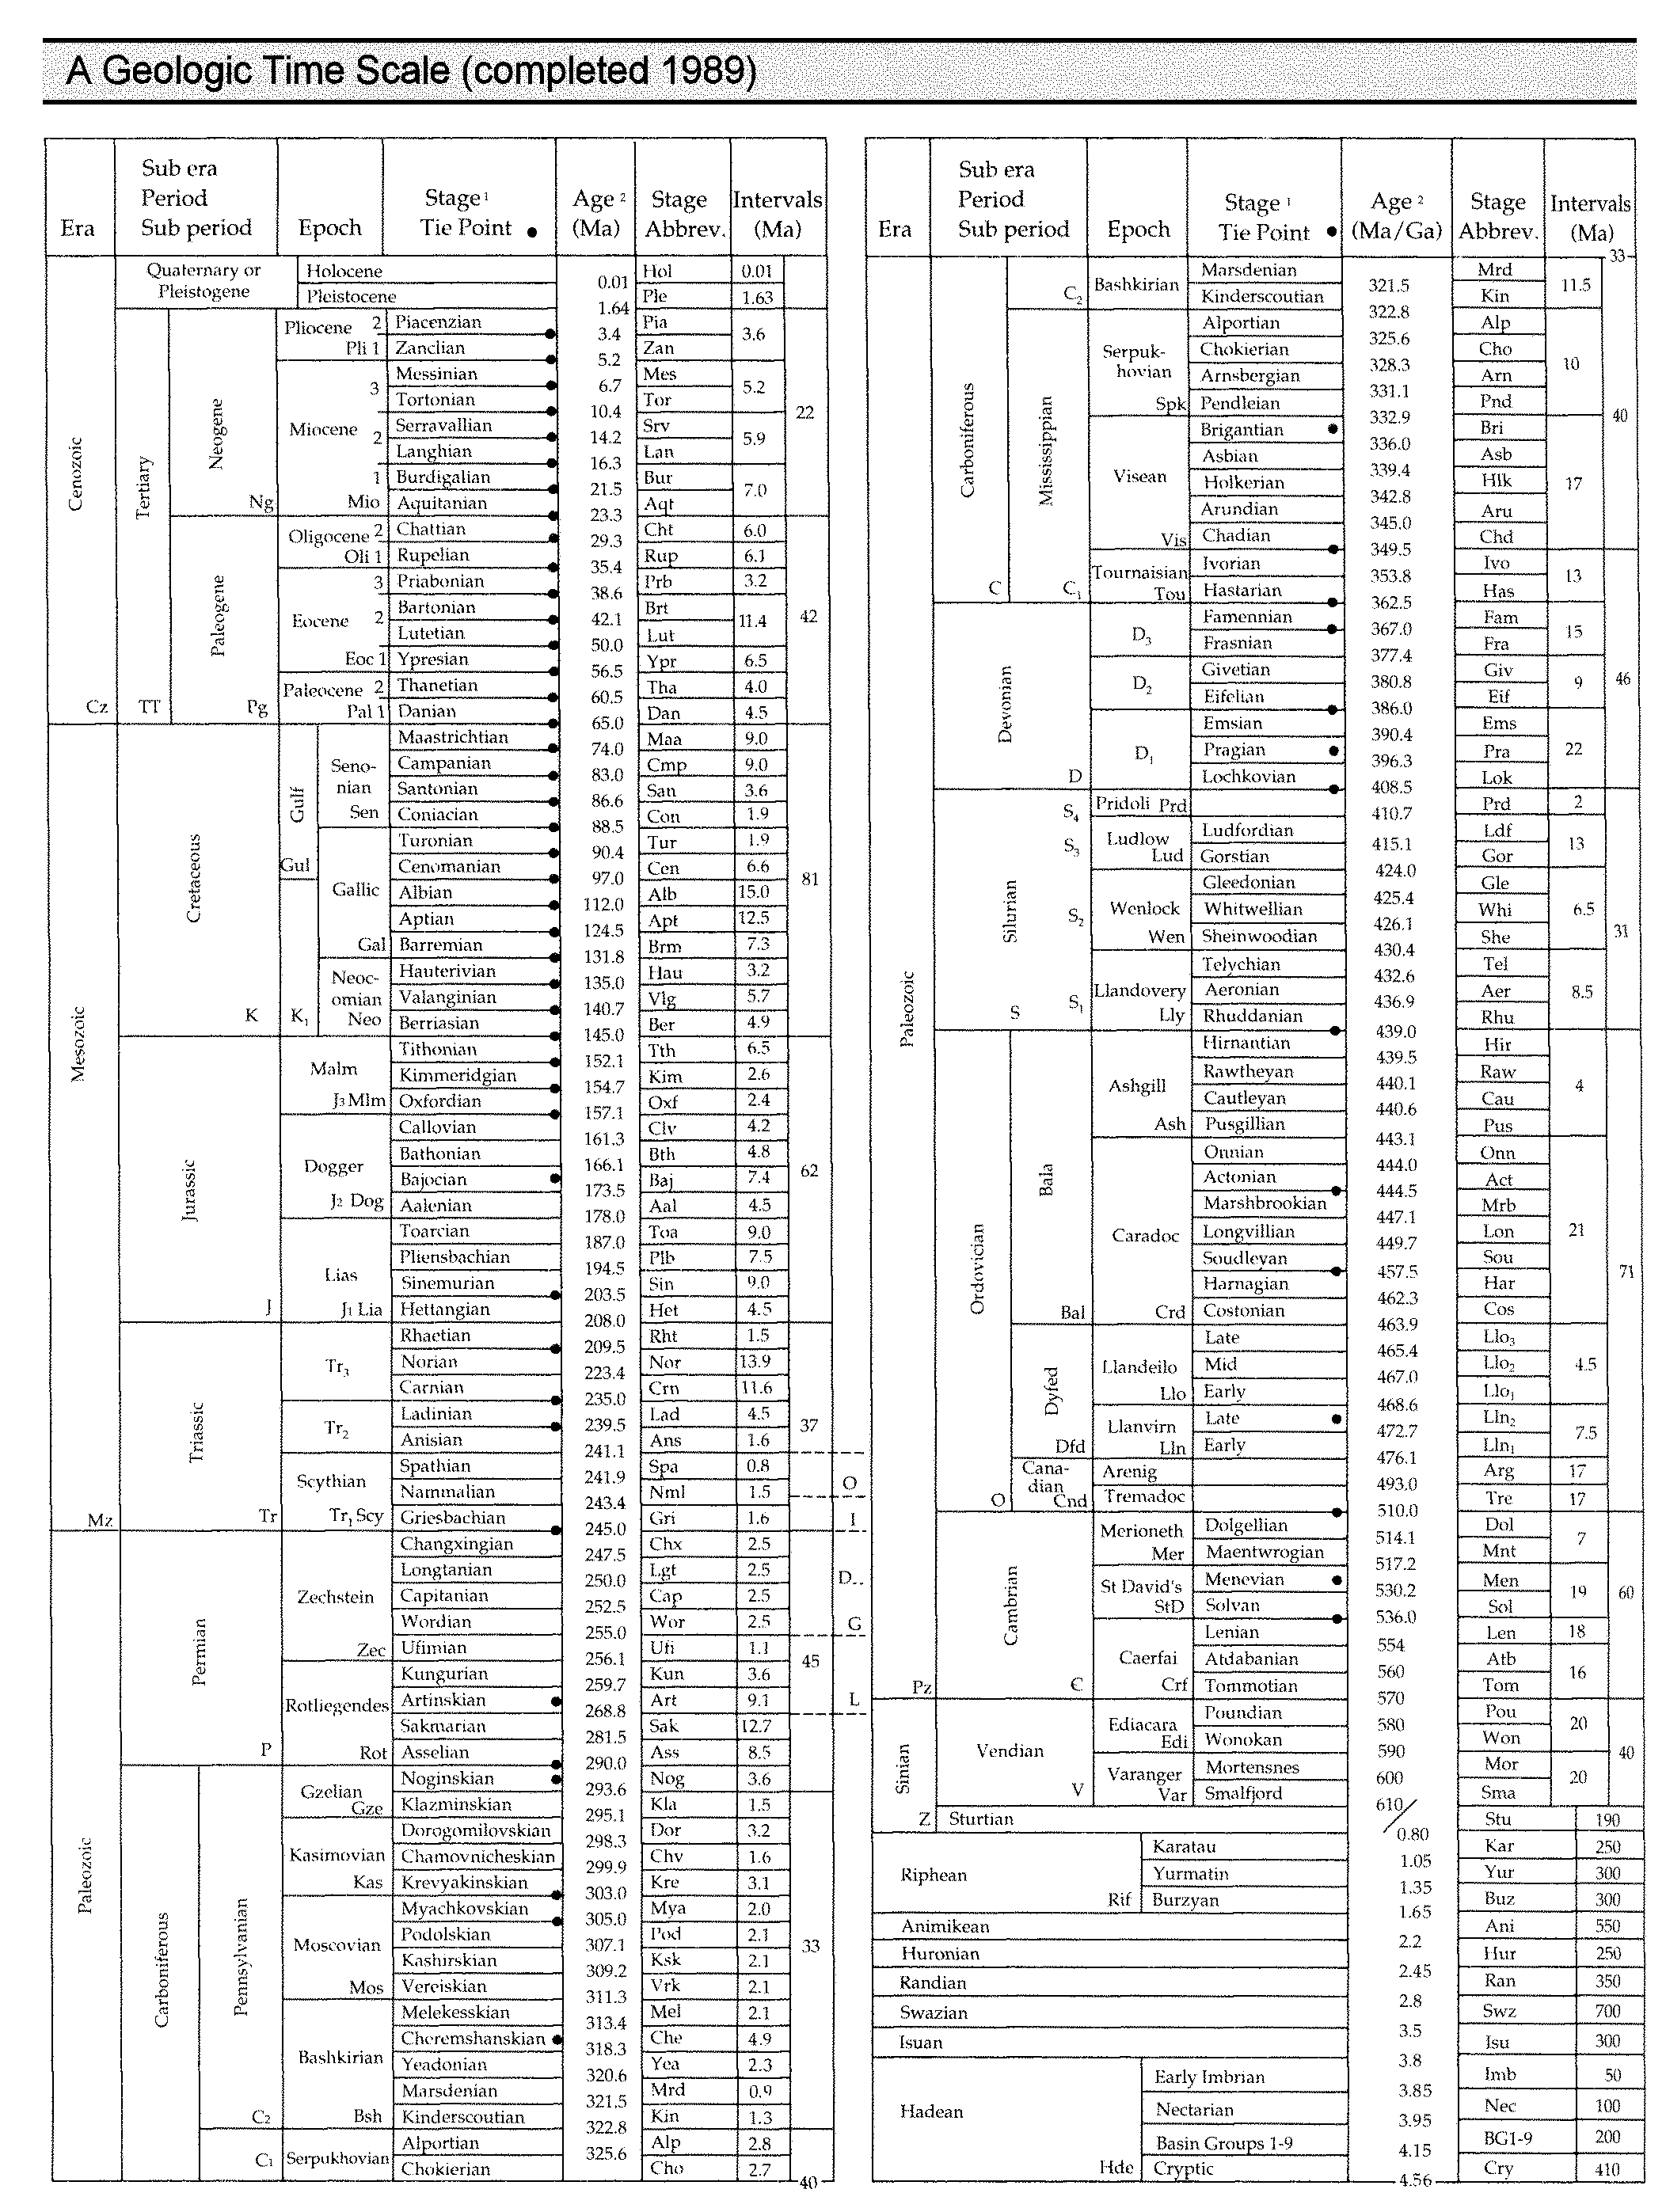 A gelological time scale (completed in 1989)